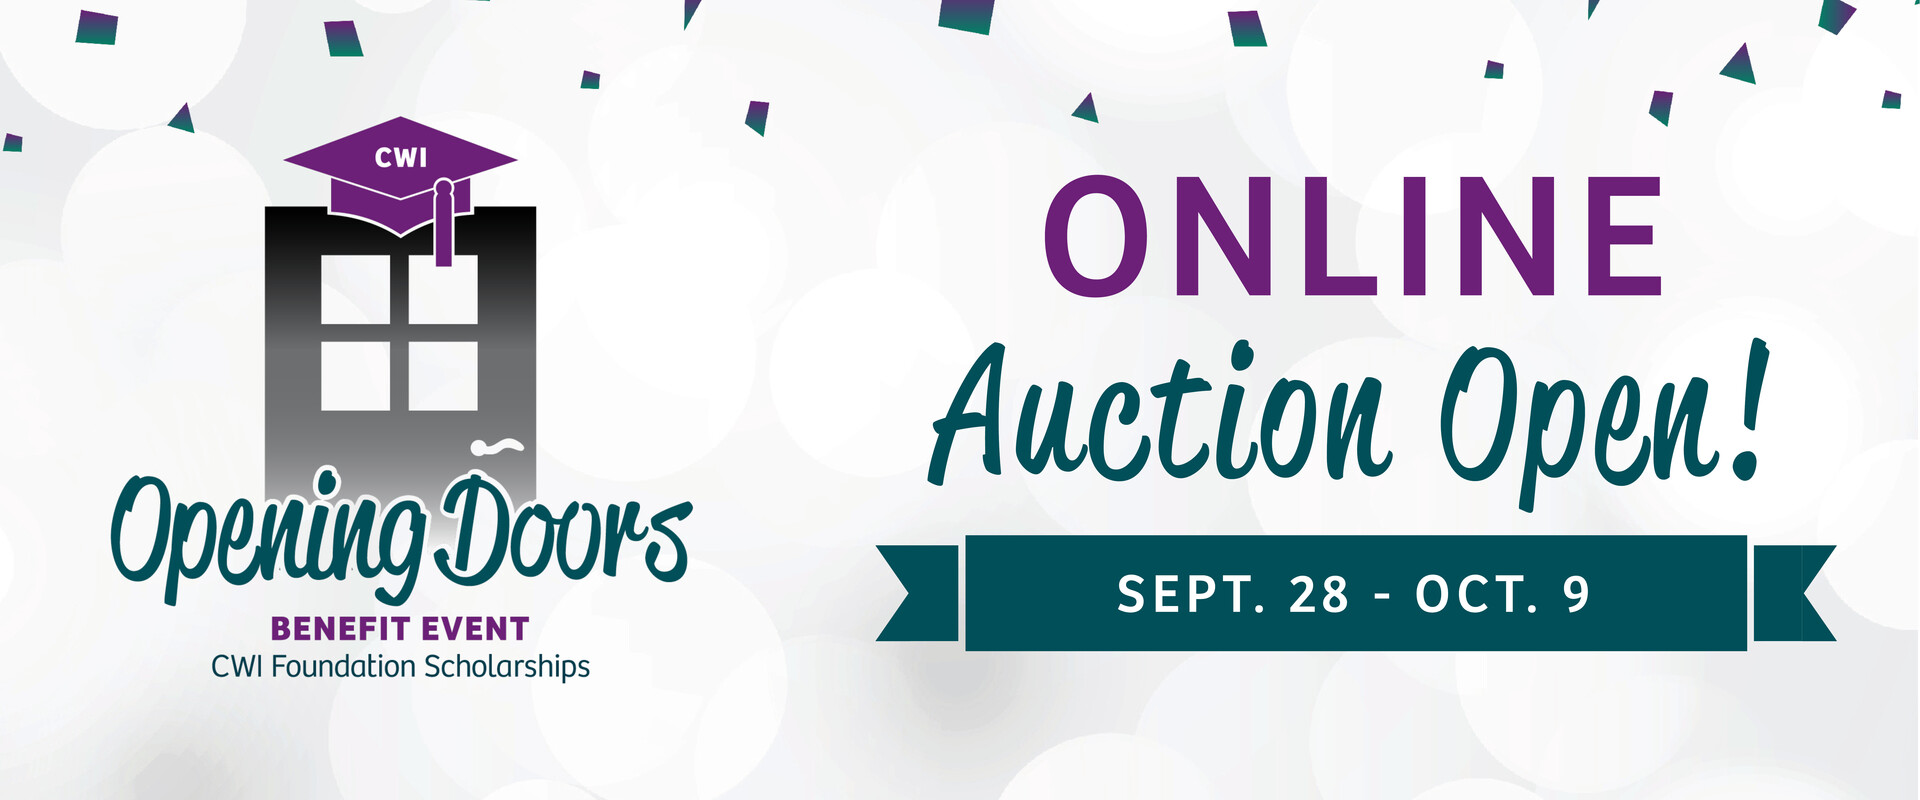 CWI Foundation Opening Doors Online Auction, Sept. 28 - Oct. 9